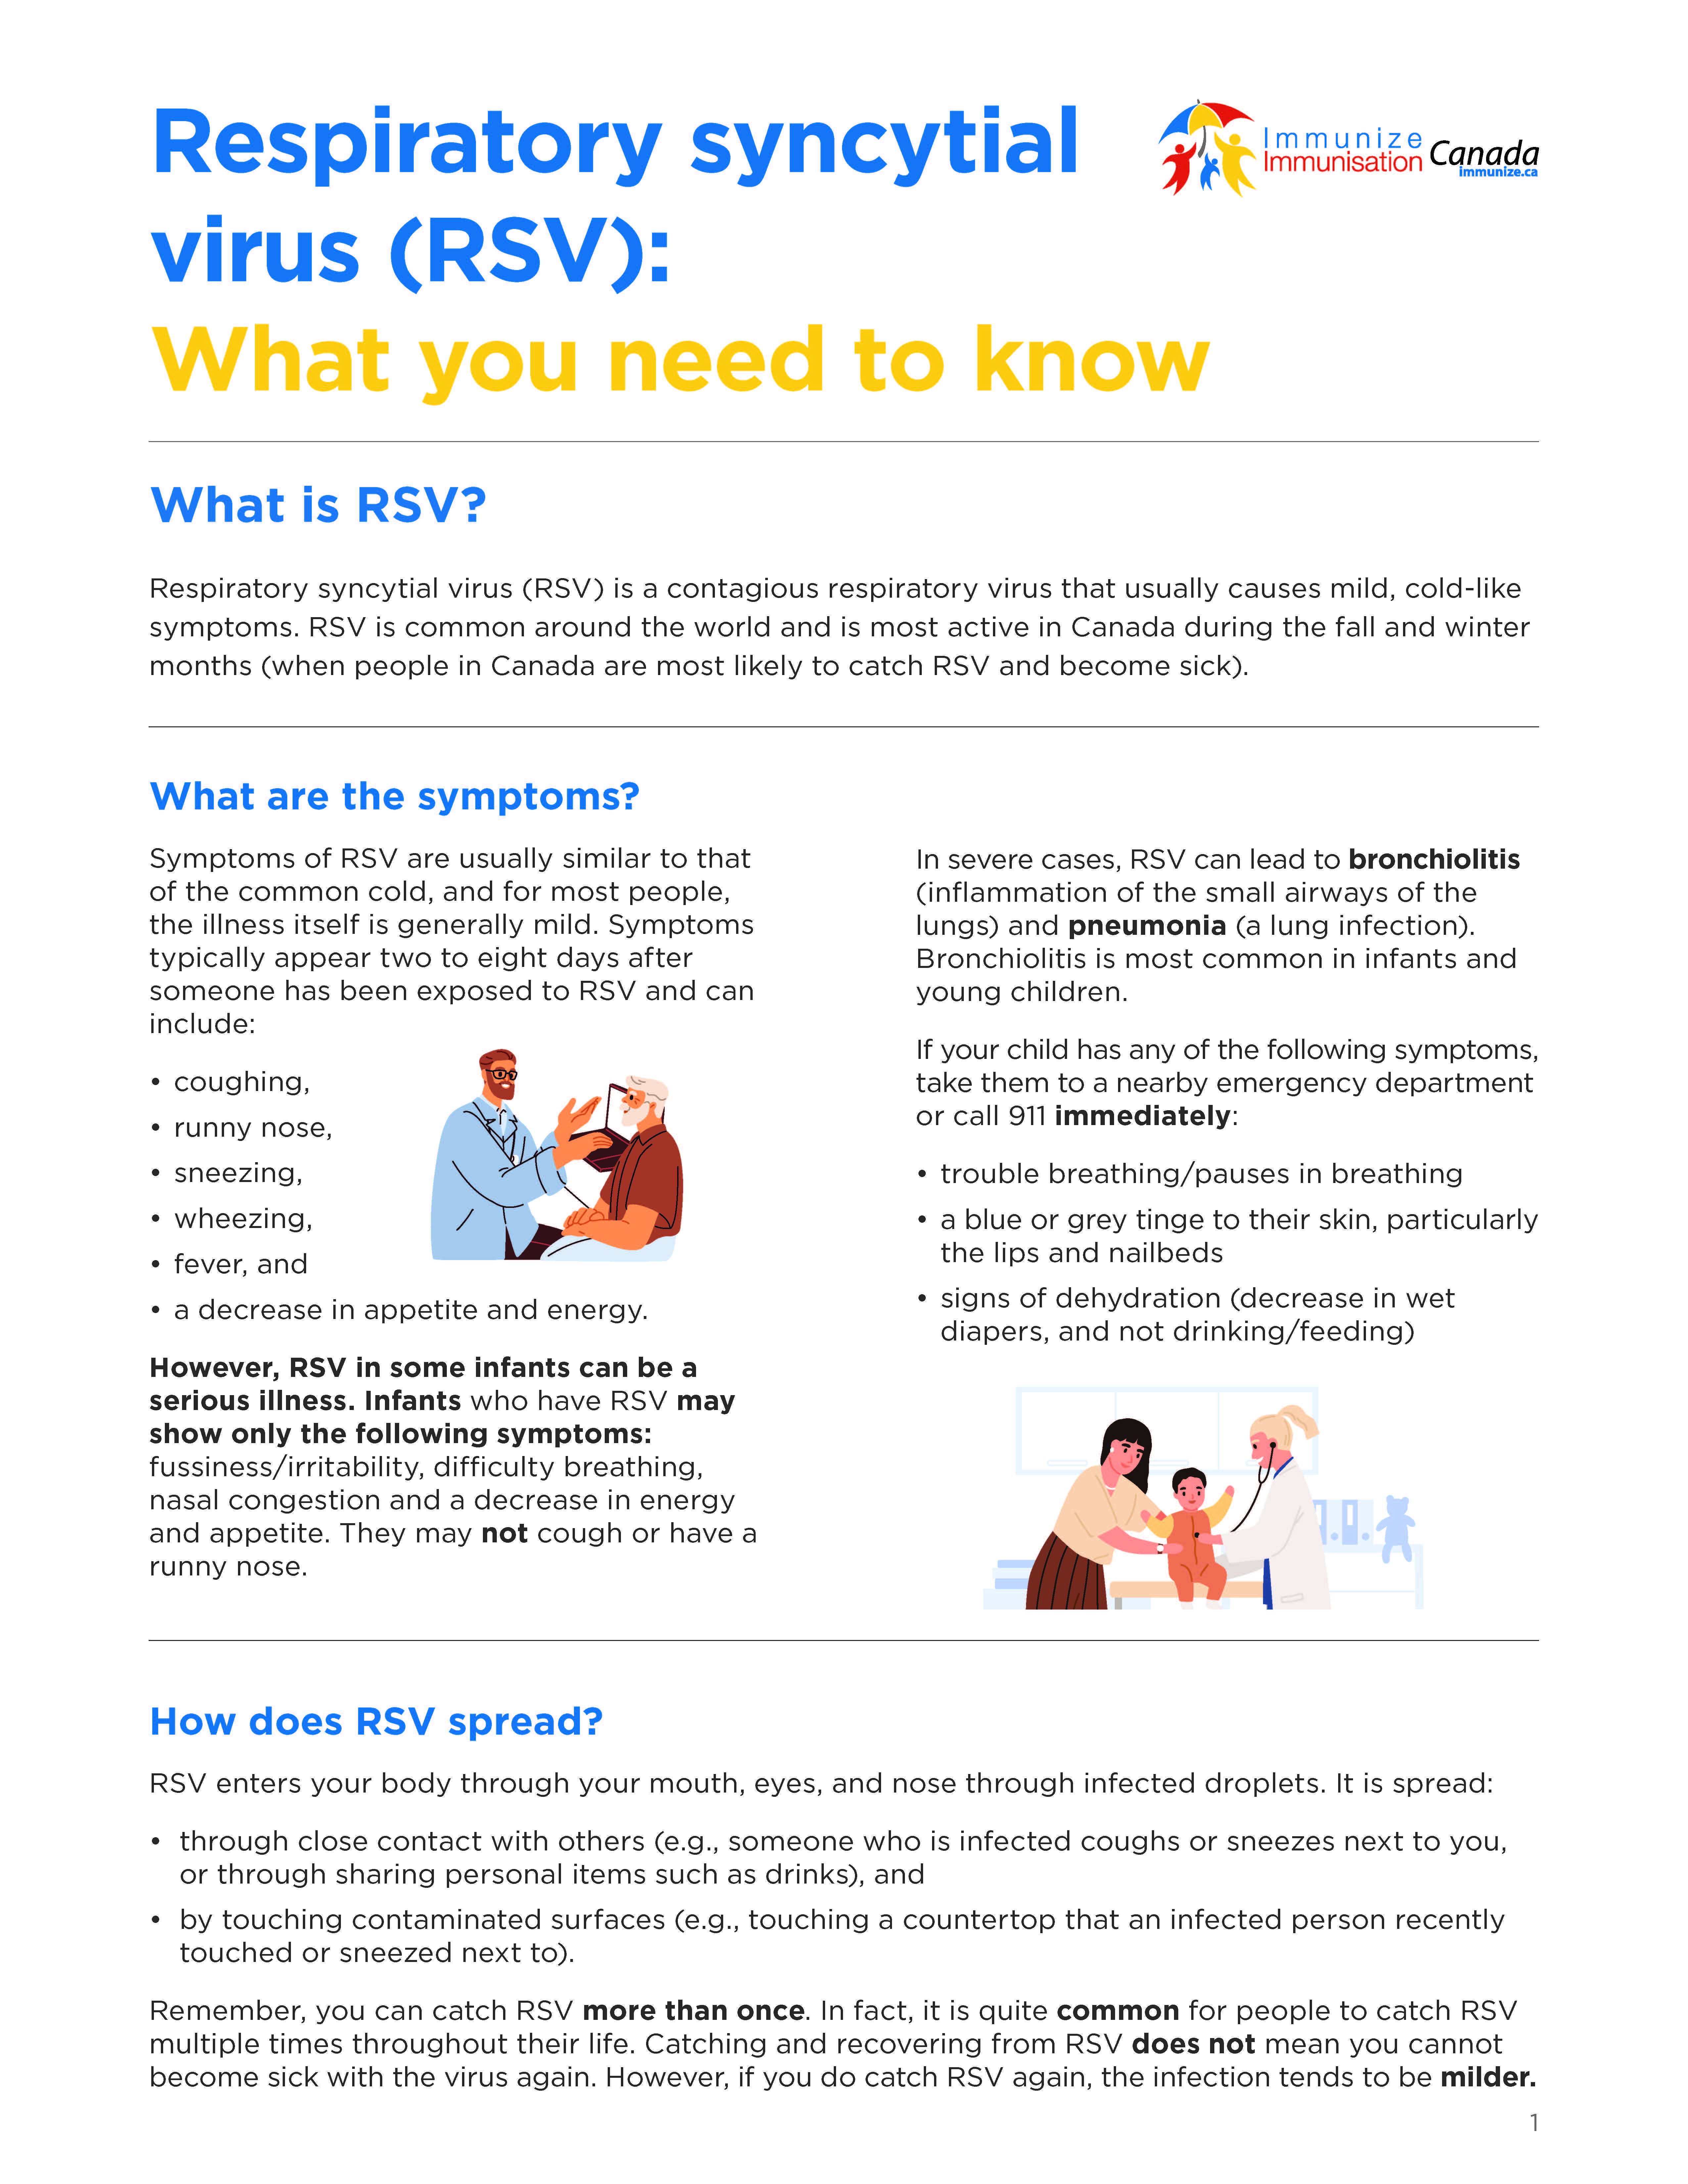 Respiratory syncytial virus (RSV): What you need to know